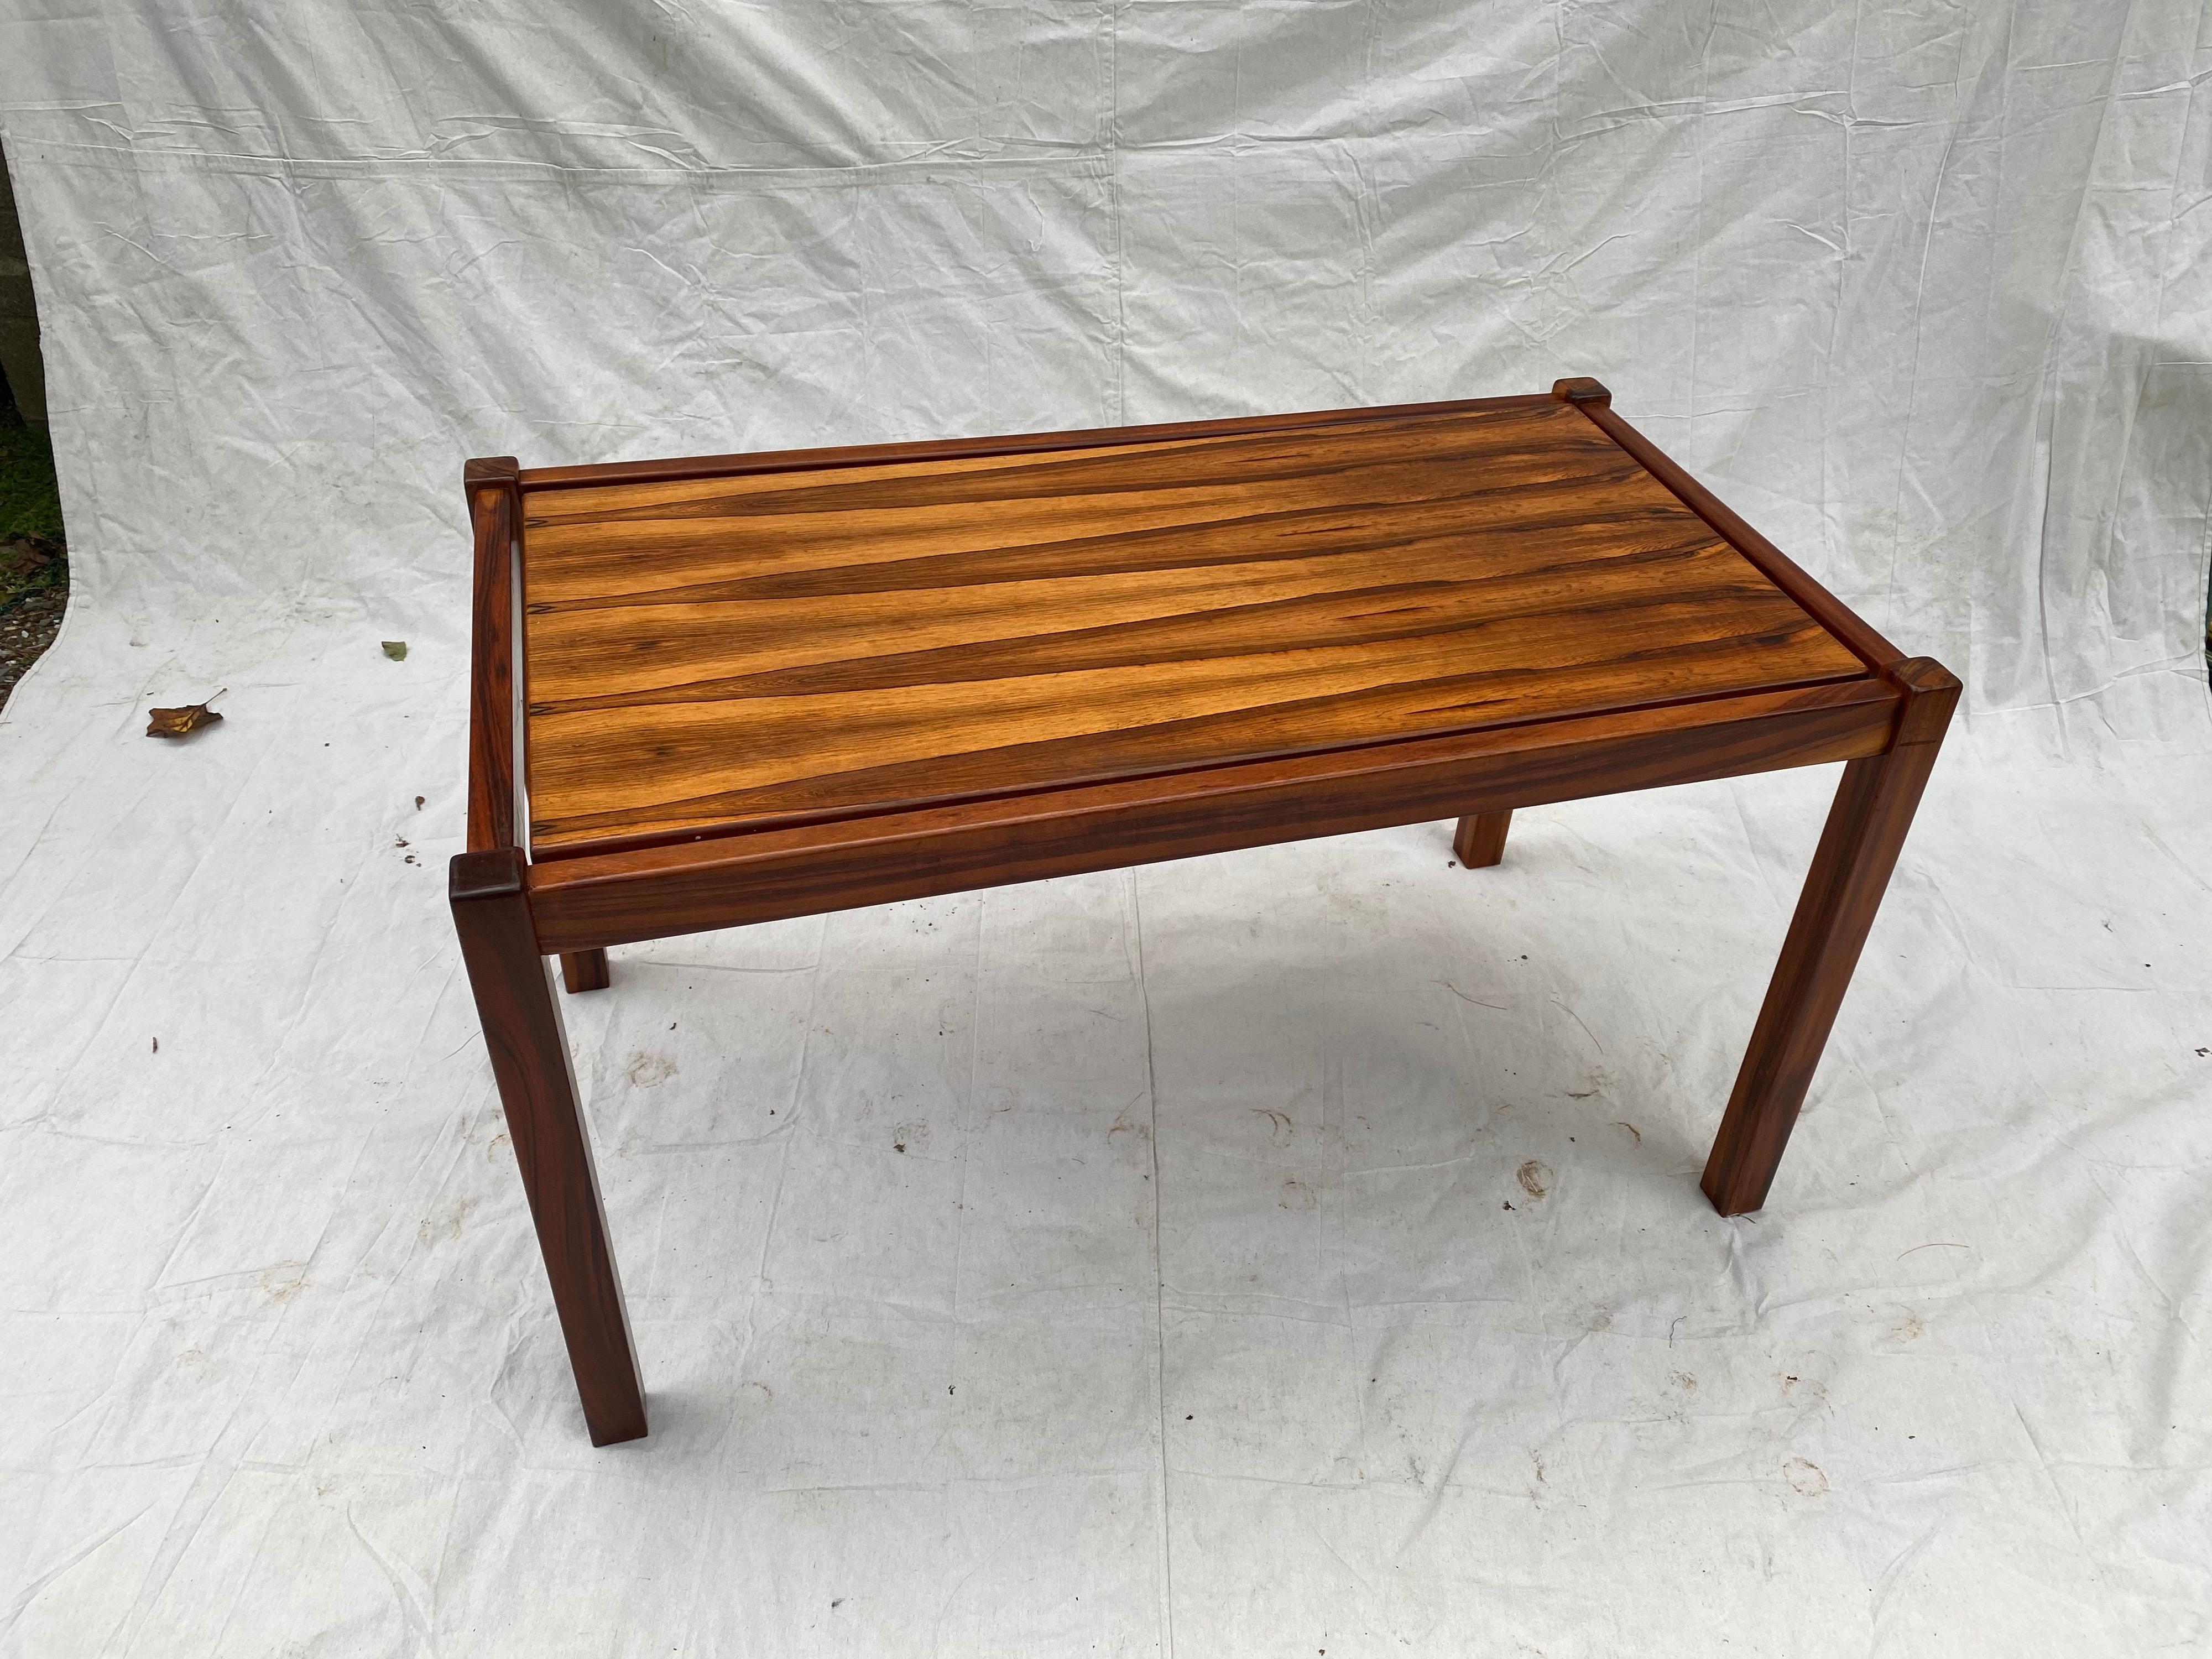 Danish rosewood desk/ table. Solid rosewood frame supports a floating rectangular top. Very impressive grain on top of table. 4 tabs hold the insert in place. Table breaks down for ease of transporting!